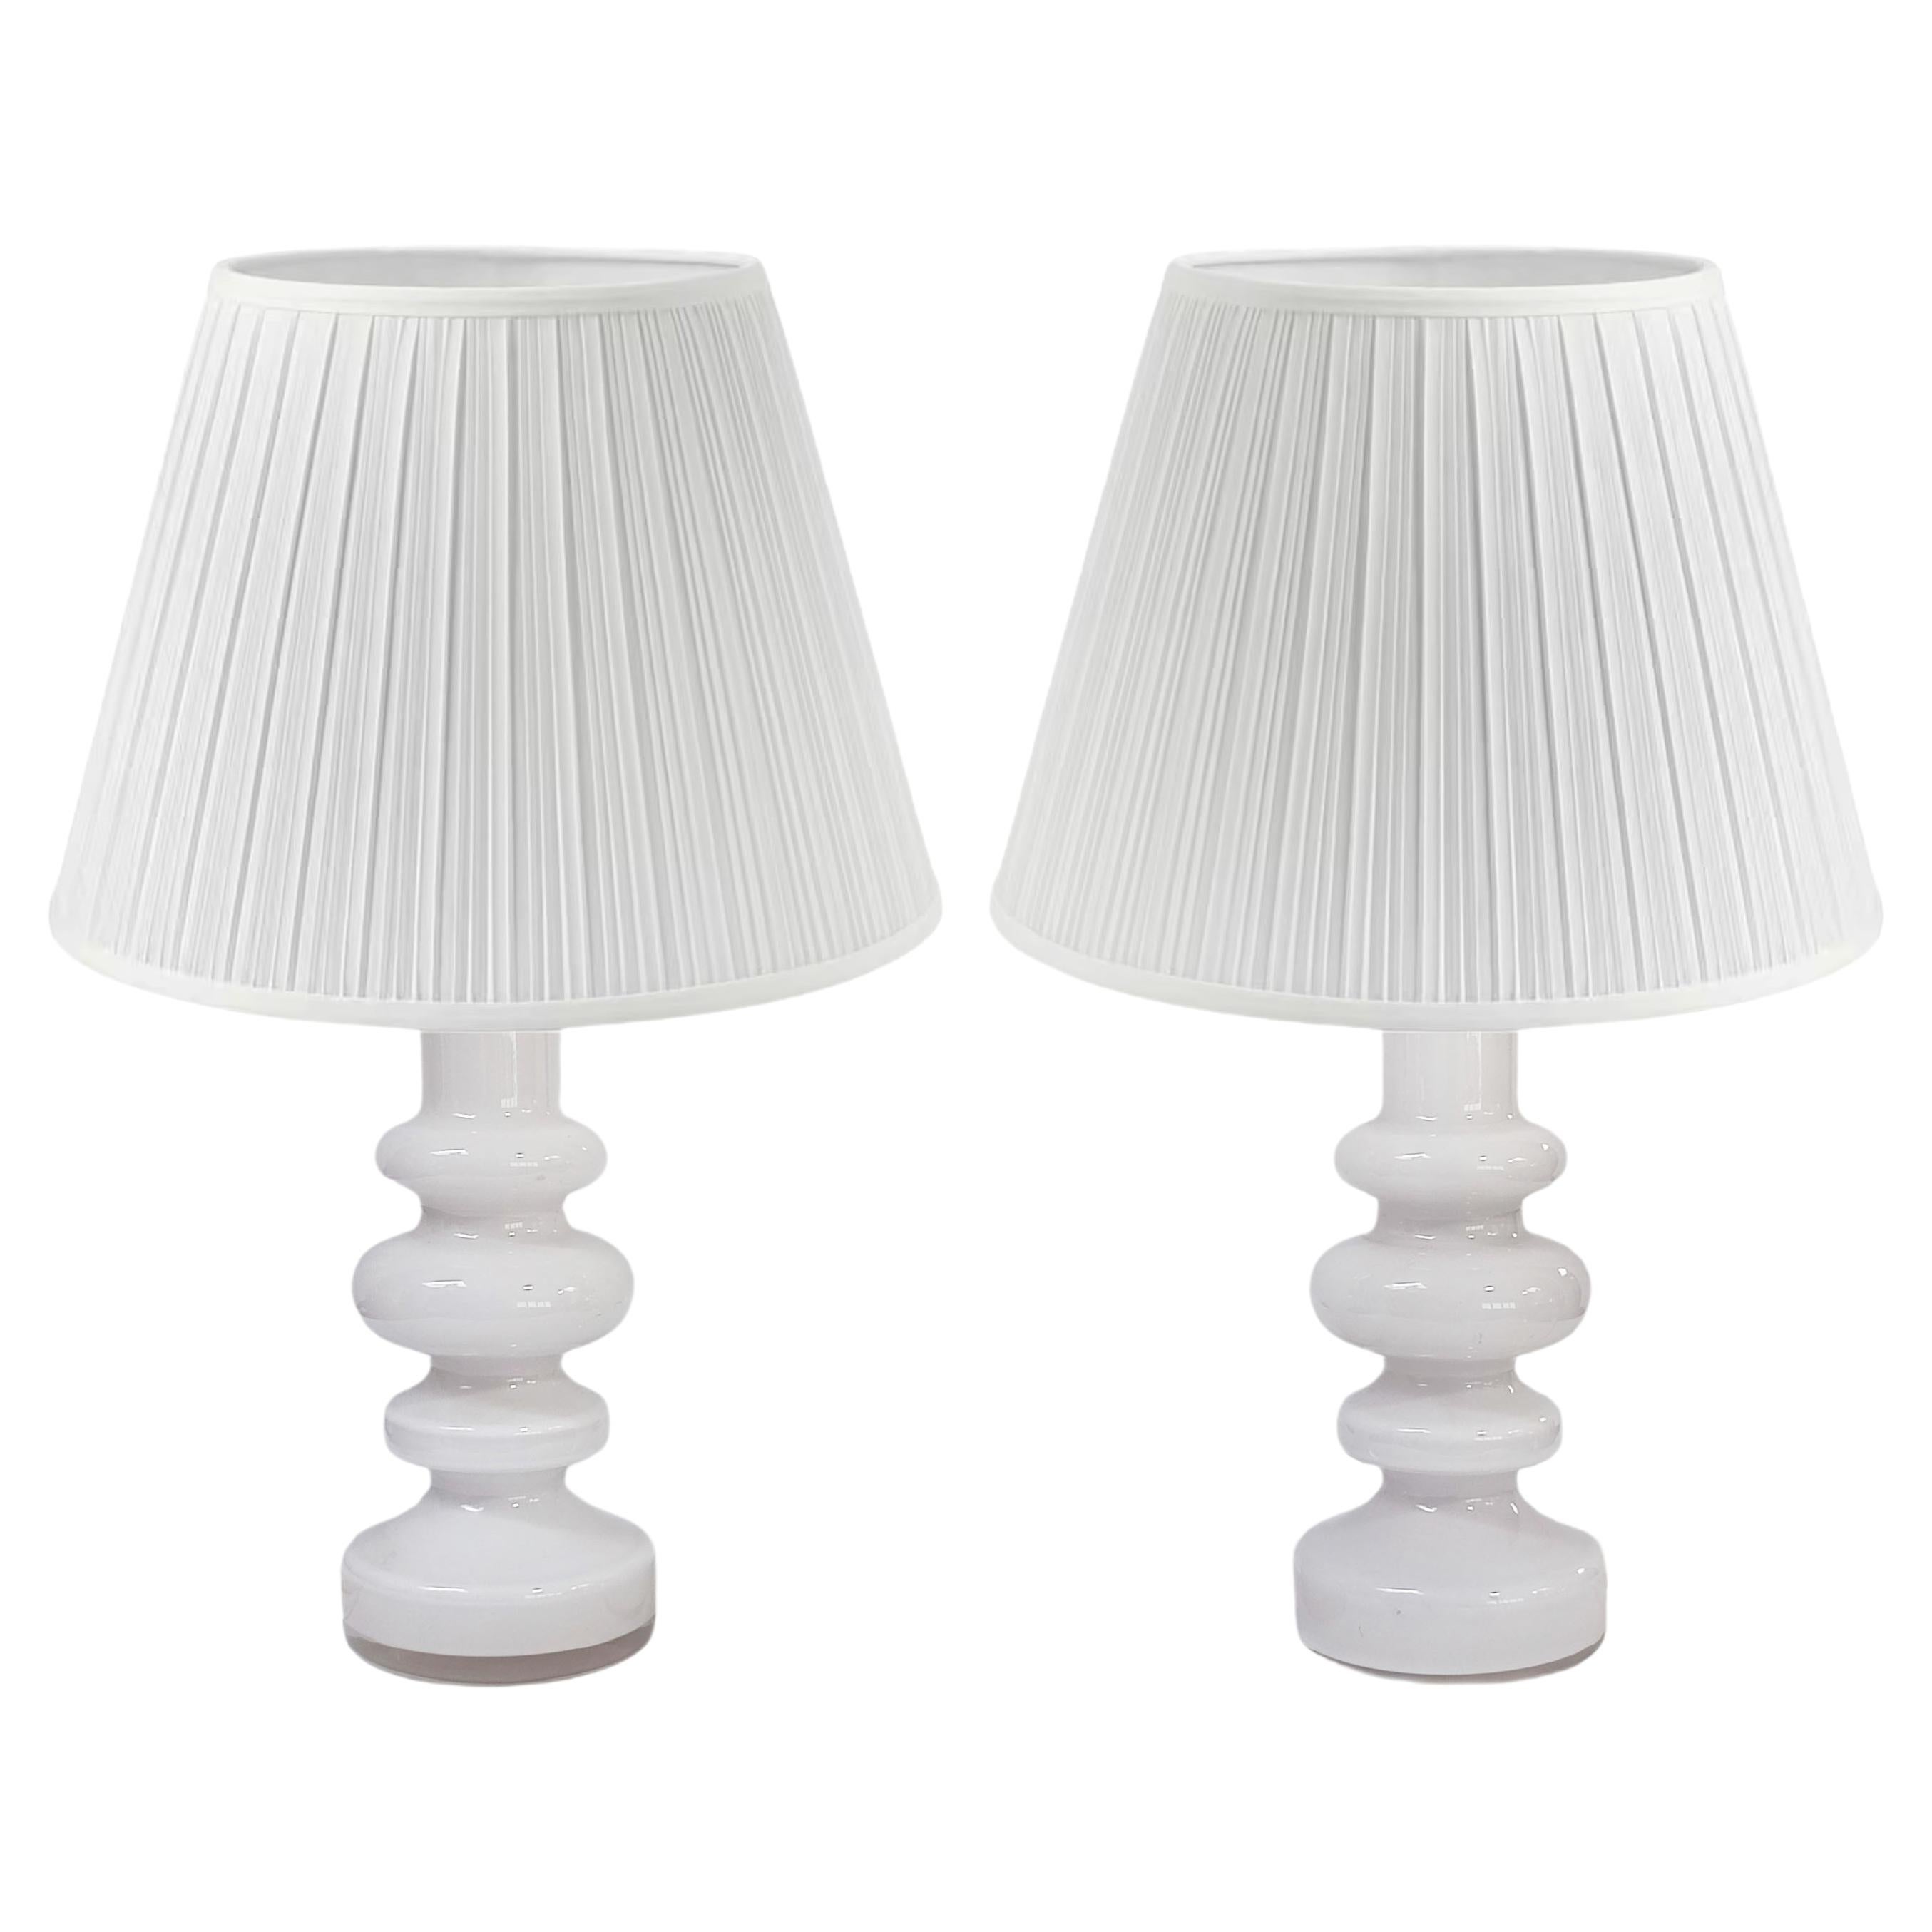 Pair of Rare White Glass Table Lamps by Gunnar Anders, Lindshammar, 1960s